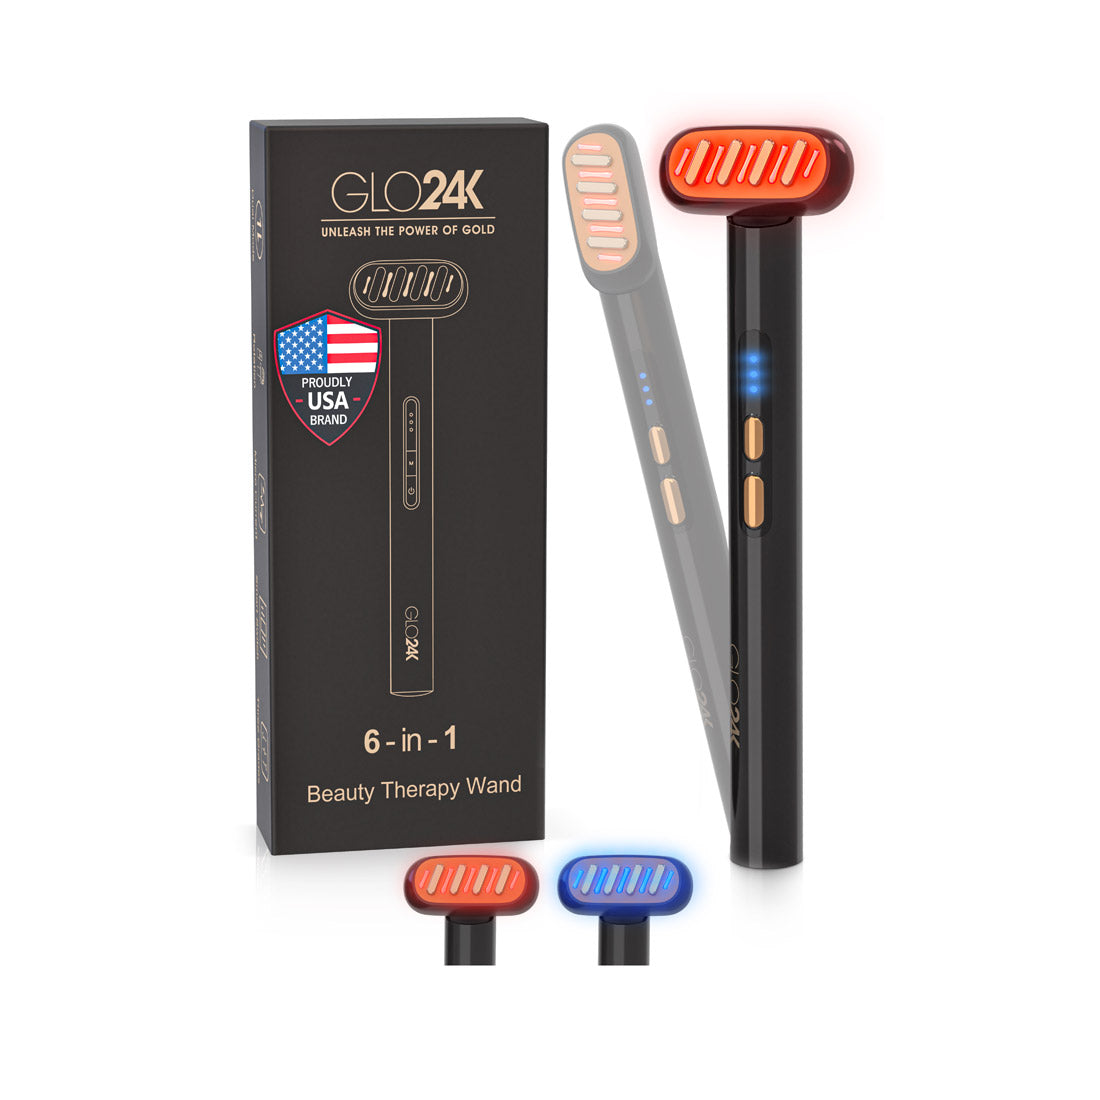 GLO24K 6-IN-1 Beauty Therapy Wand